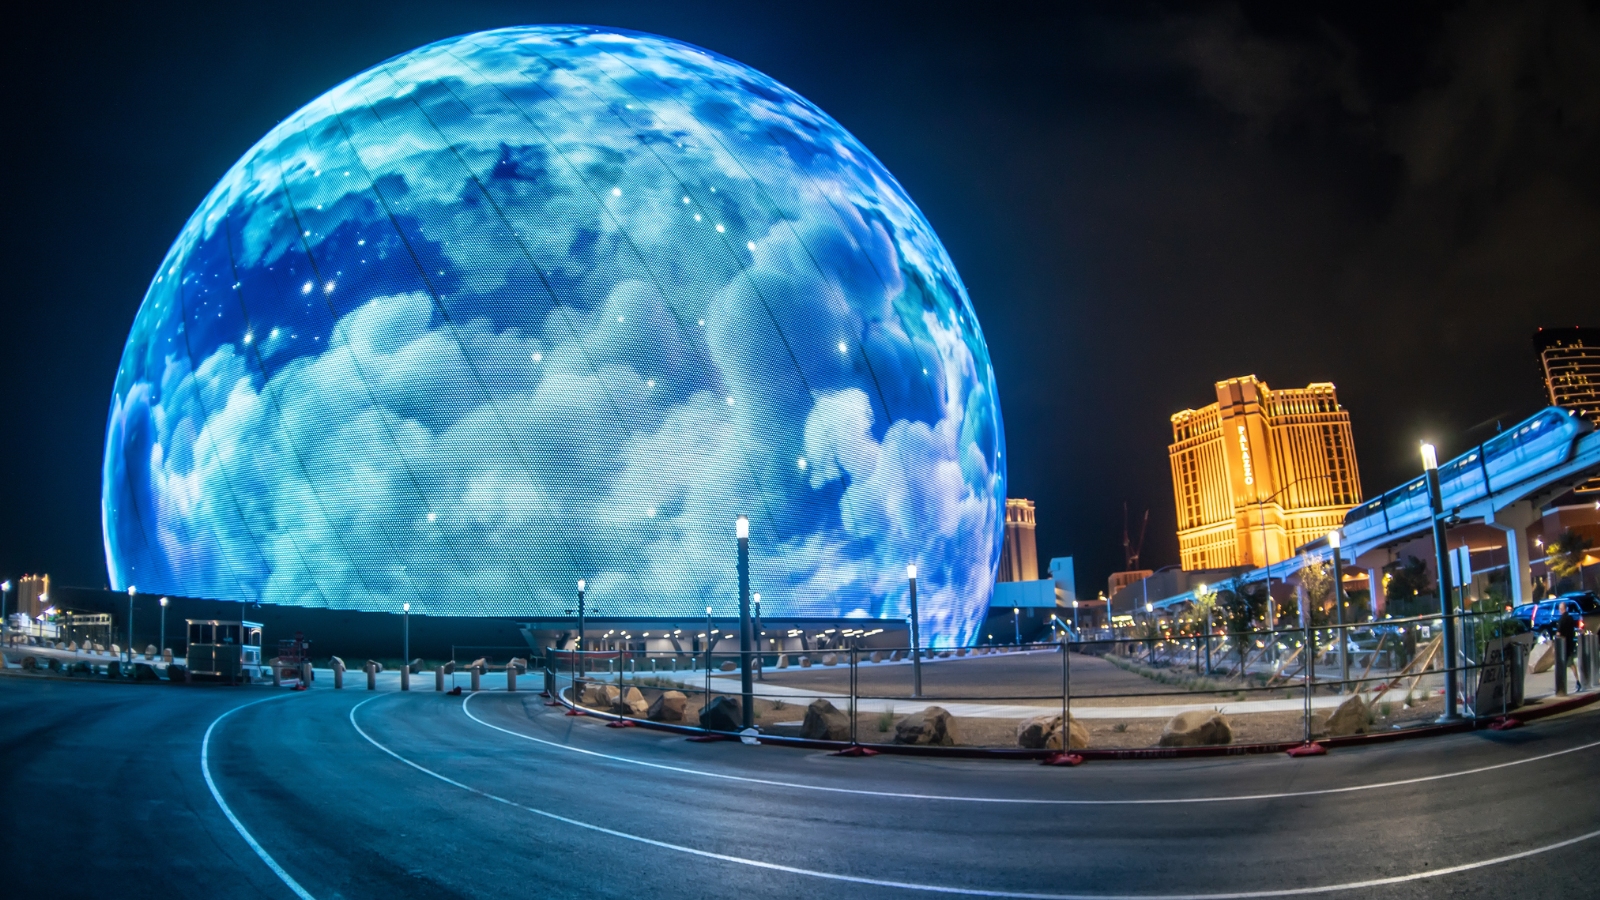 The world's most unique billboard: The hefty price tag to advertise on the  Vegas Sphere